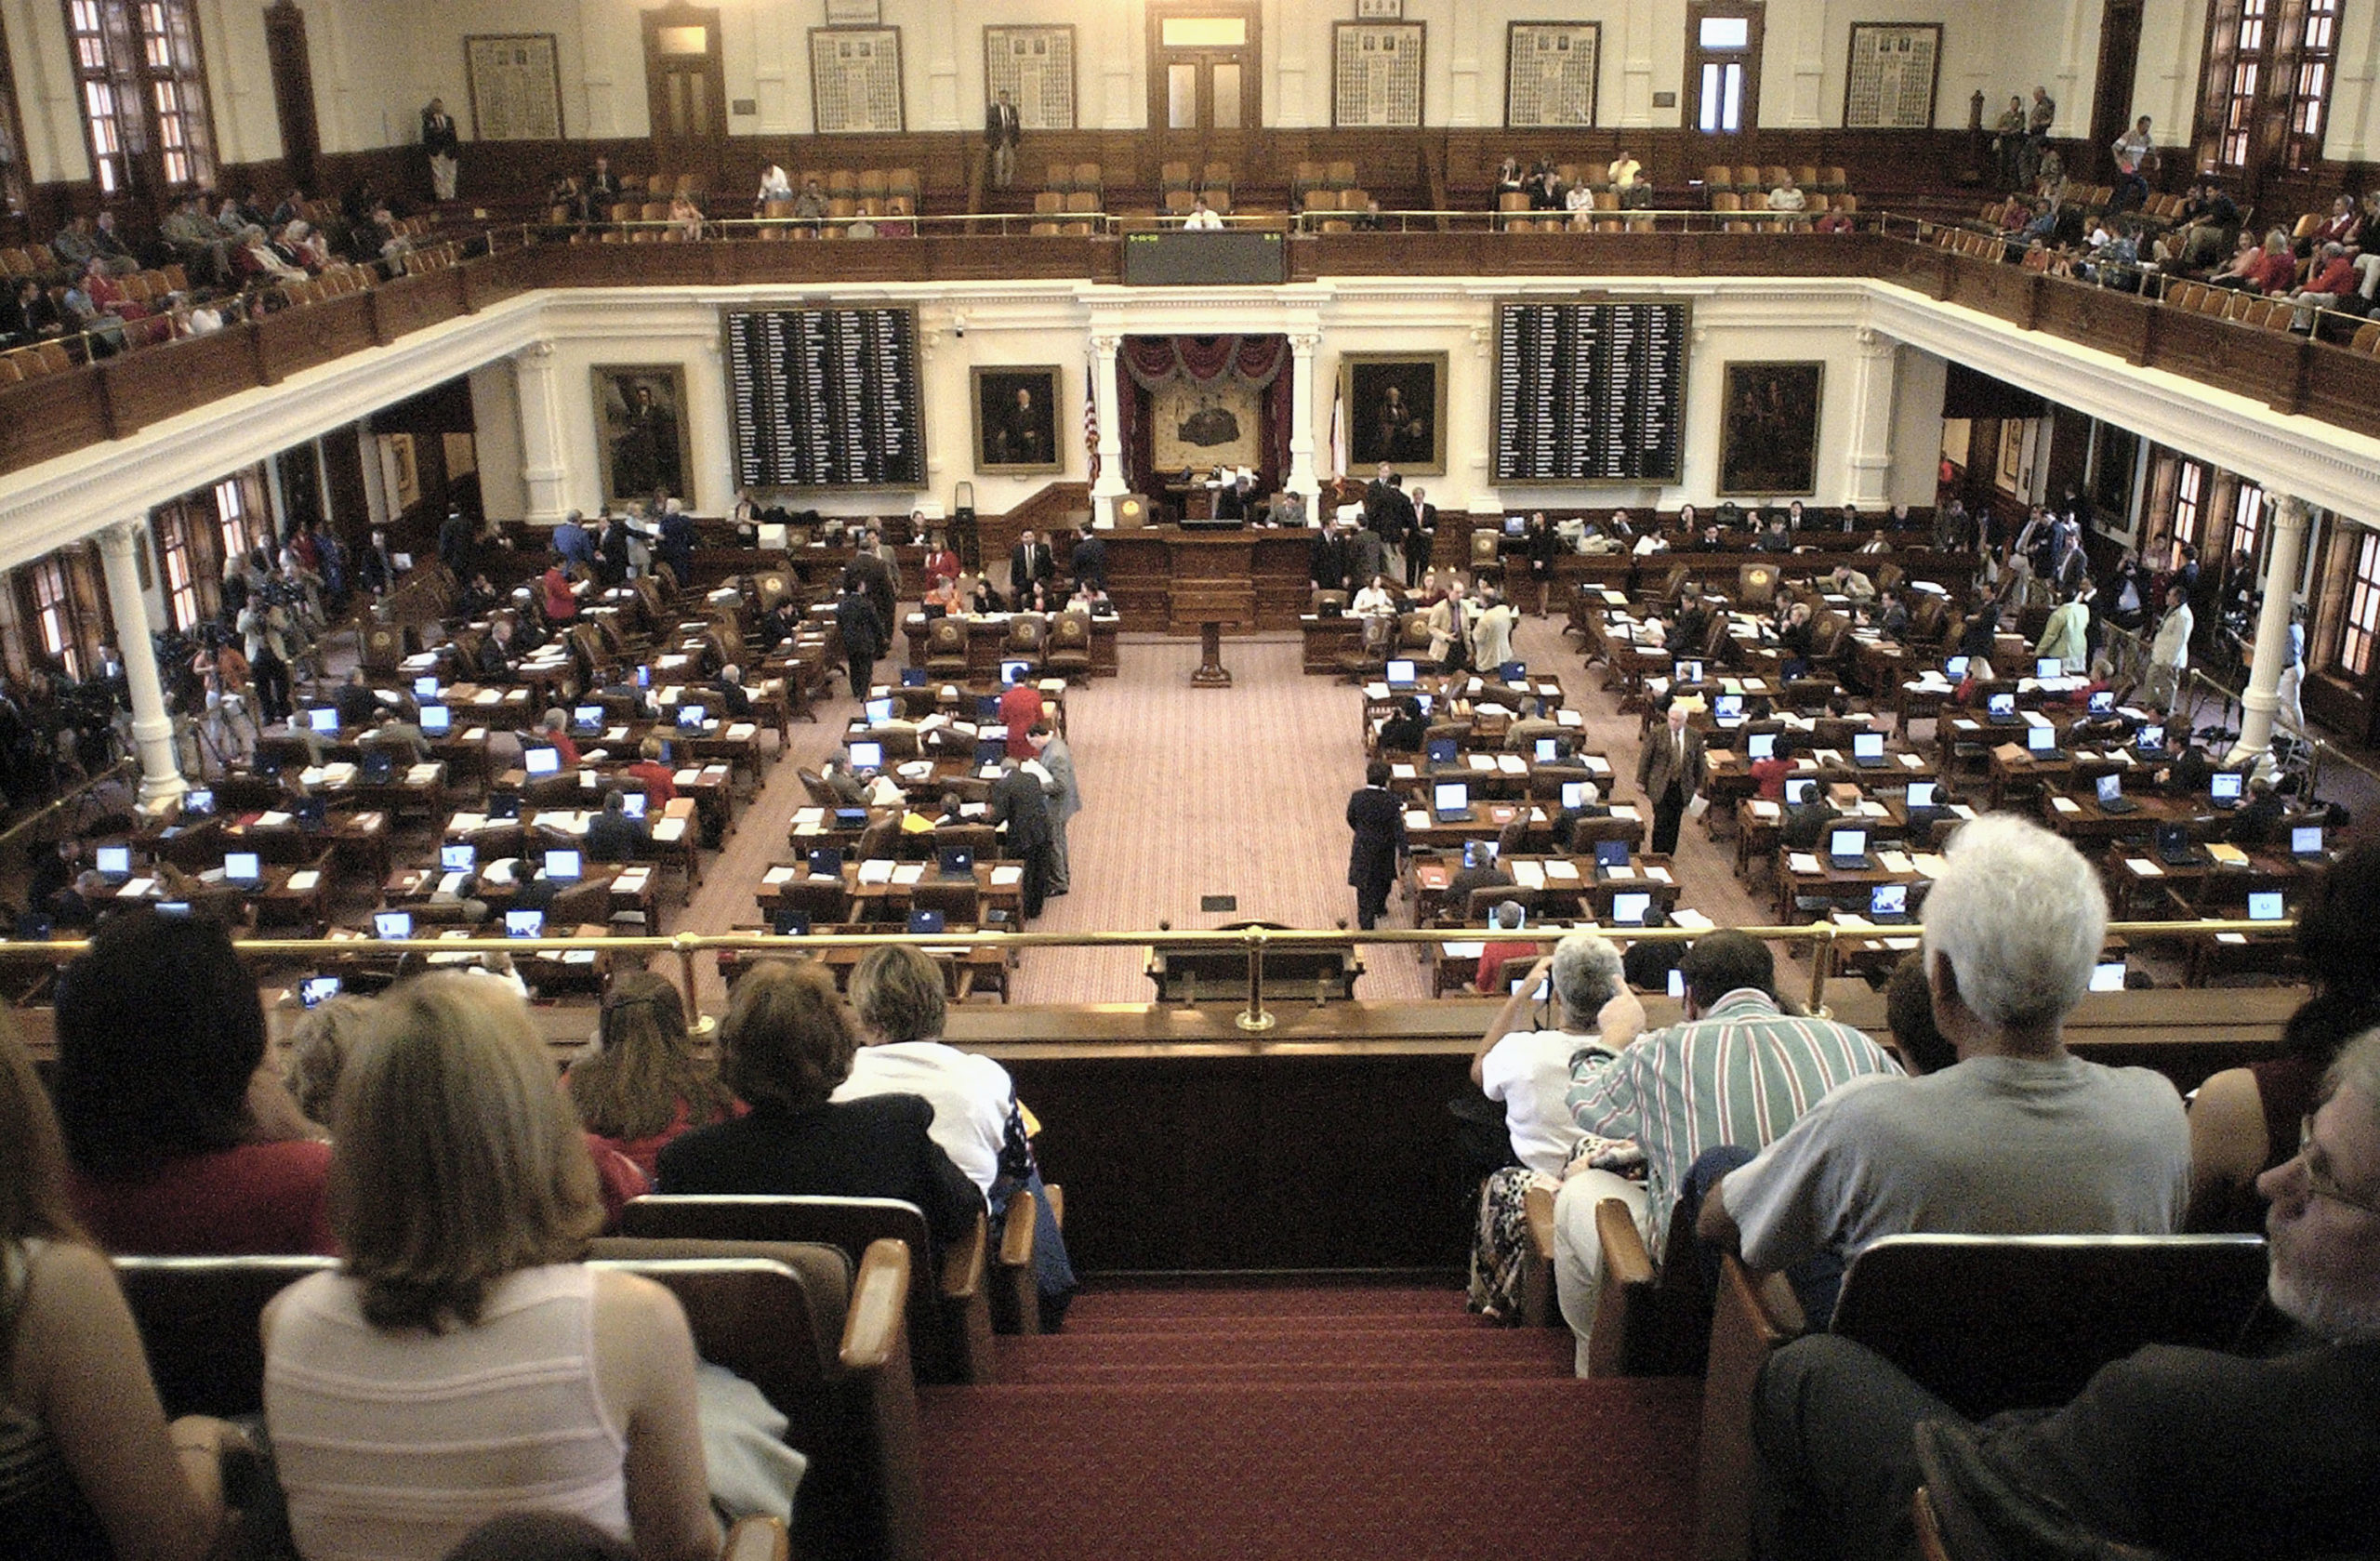 The Texas Legislature is seen in session on May 16, 2003, in Austin, Texas.